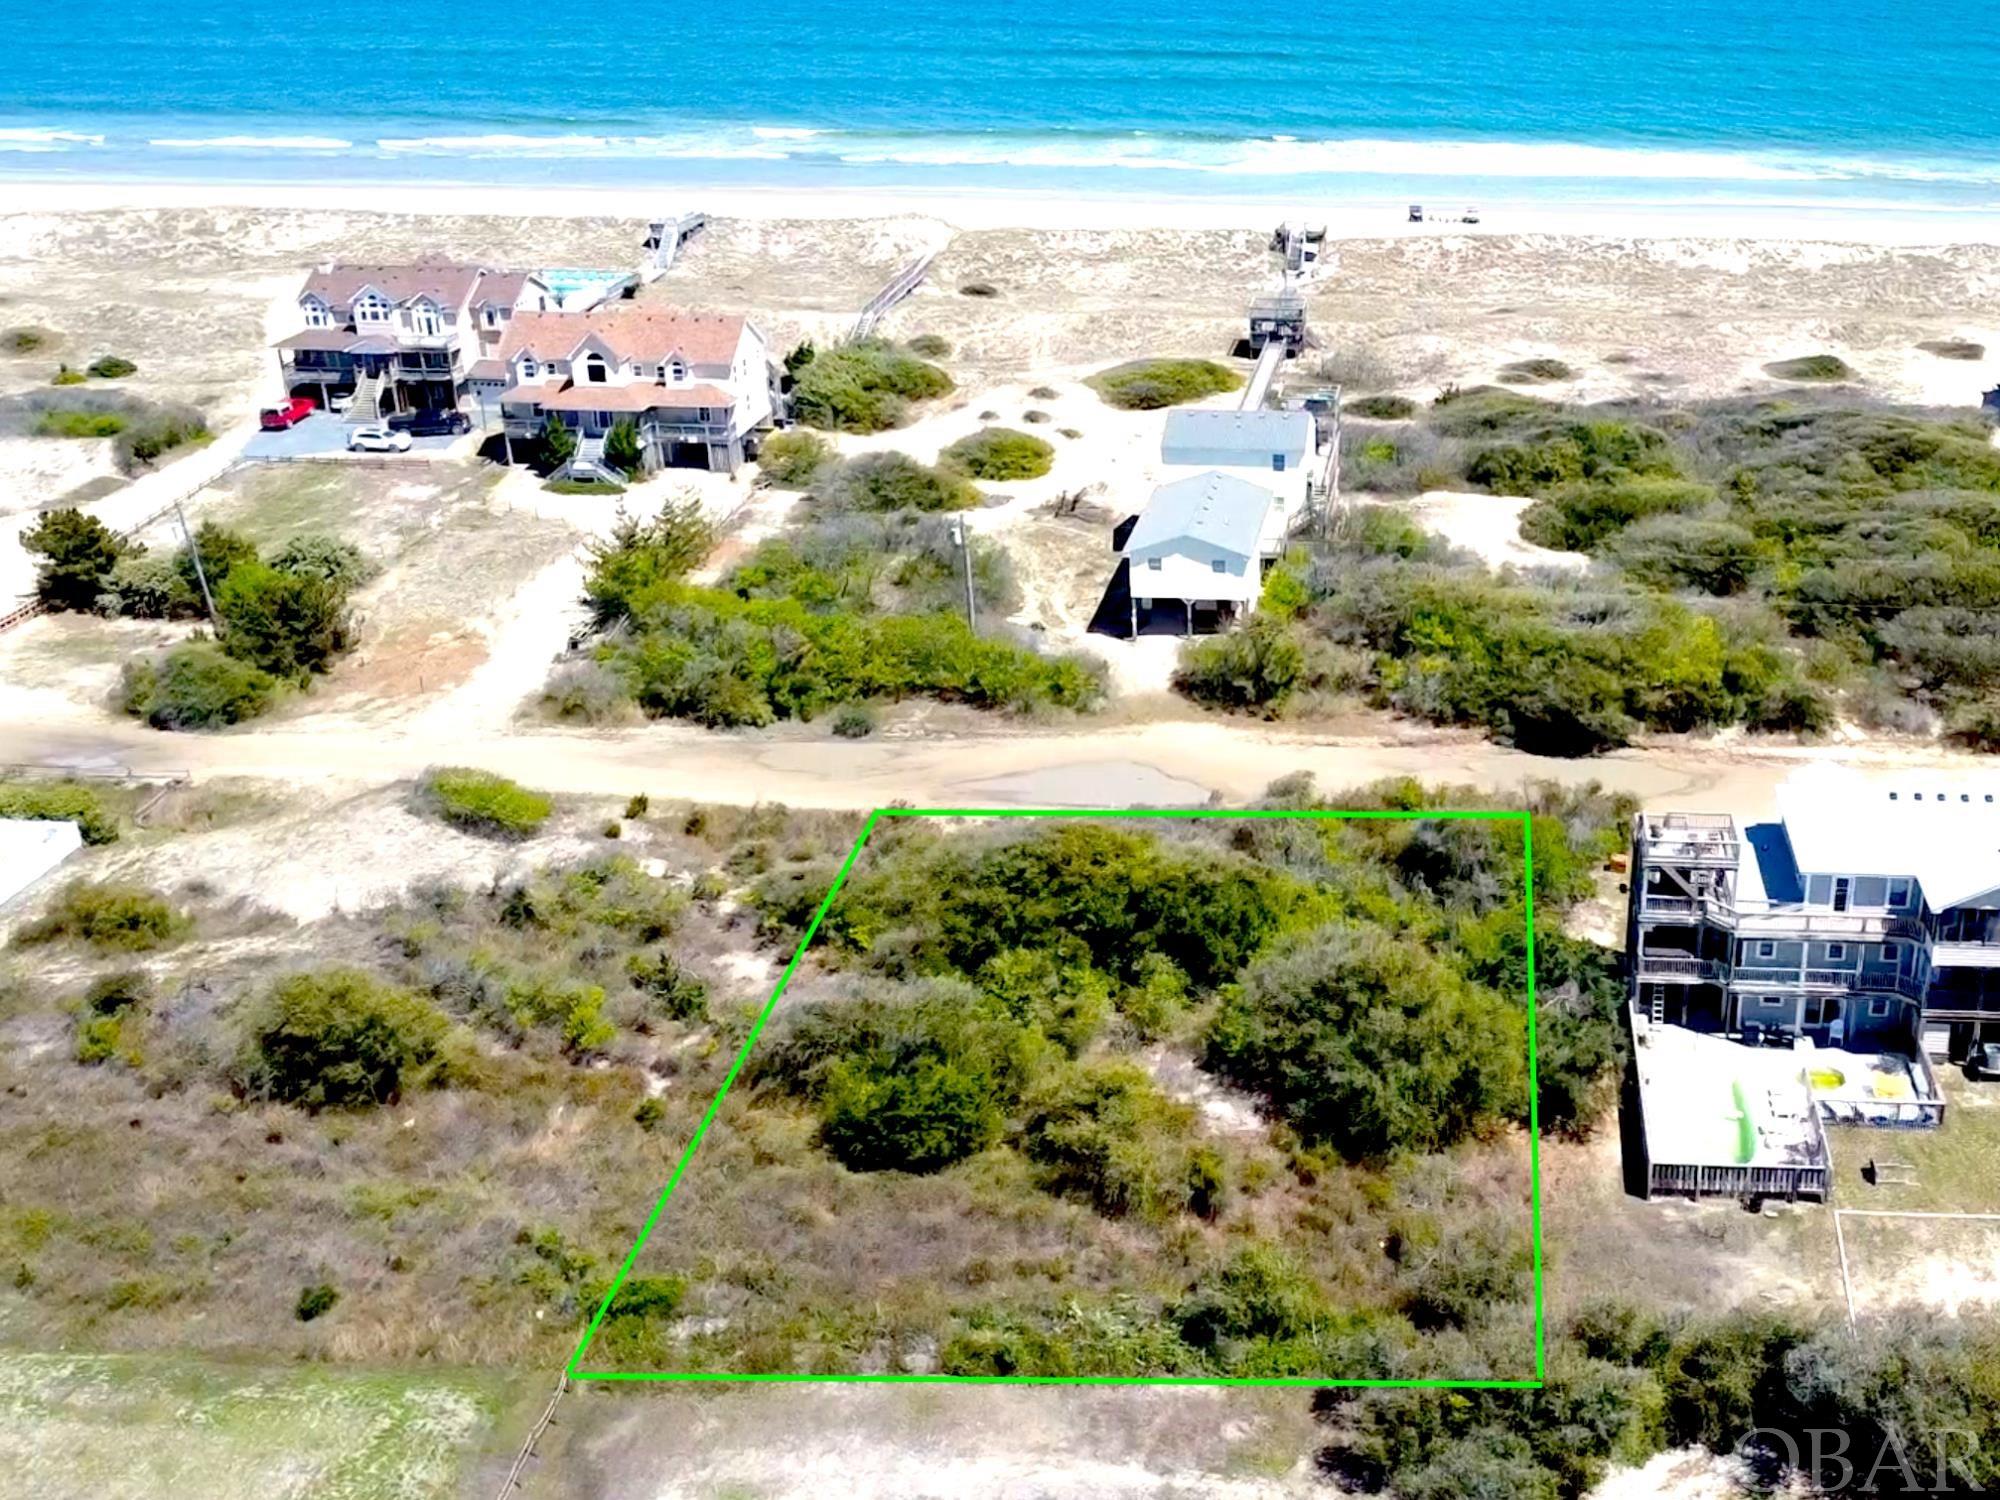 Amazing Ocean Views from this 2nd Row, Semi-Oceanfront lot in Carova's wild & wonderful 4x4 area of the Outer Banks.  This rare, pristine, flat lot will deliver 360-degree ocean views from the decks of your future dream home.  The lot's close proximity to the nearest beach ramp, provides easy access to the most spacious beach in Carova.  Wild horses roam your property and will be frequent visitors as you enjoy your your morning coffee while overlooking one of the last untamed areas of the Outer Banks.